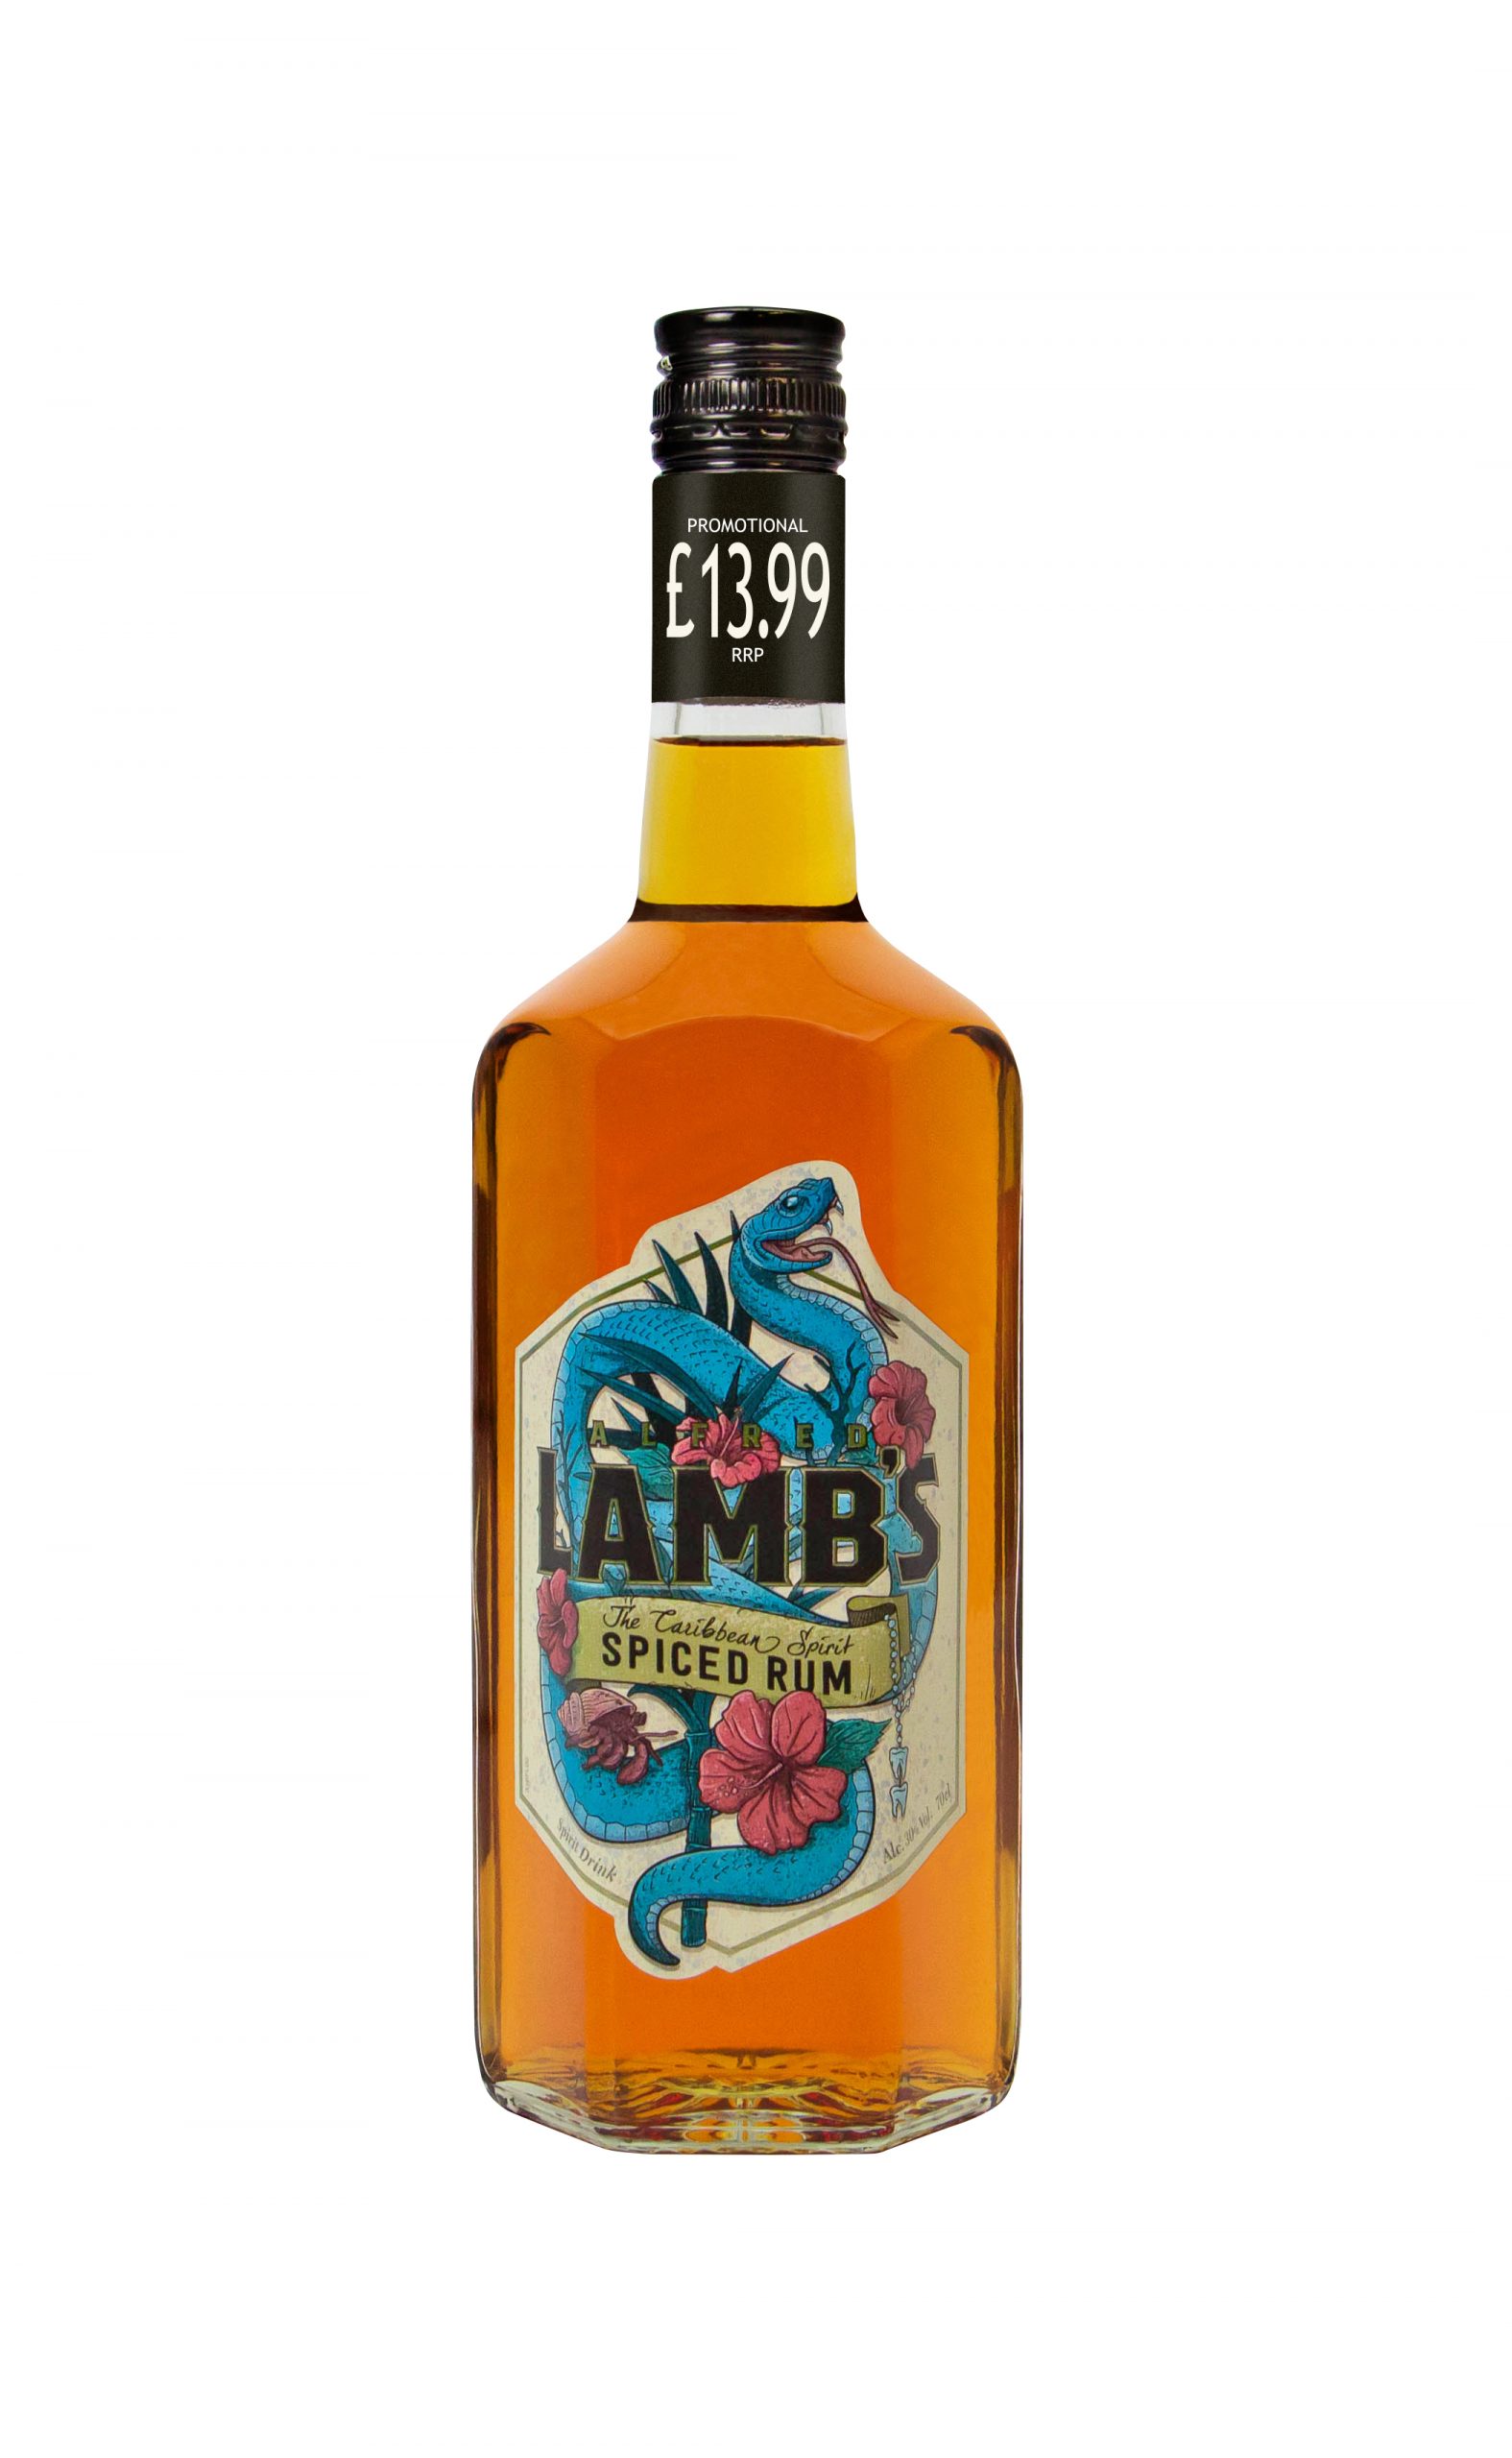 New £13.99 price-mark for Lamb’s Spiced Rum